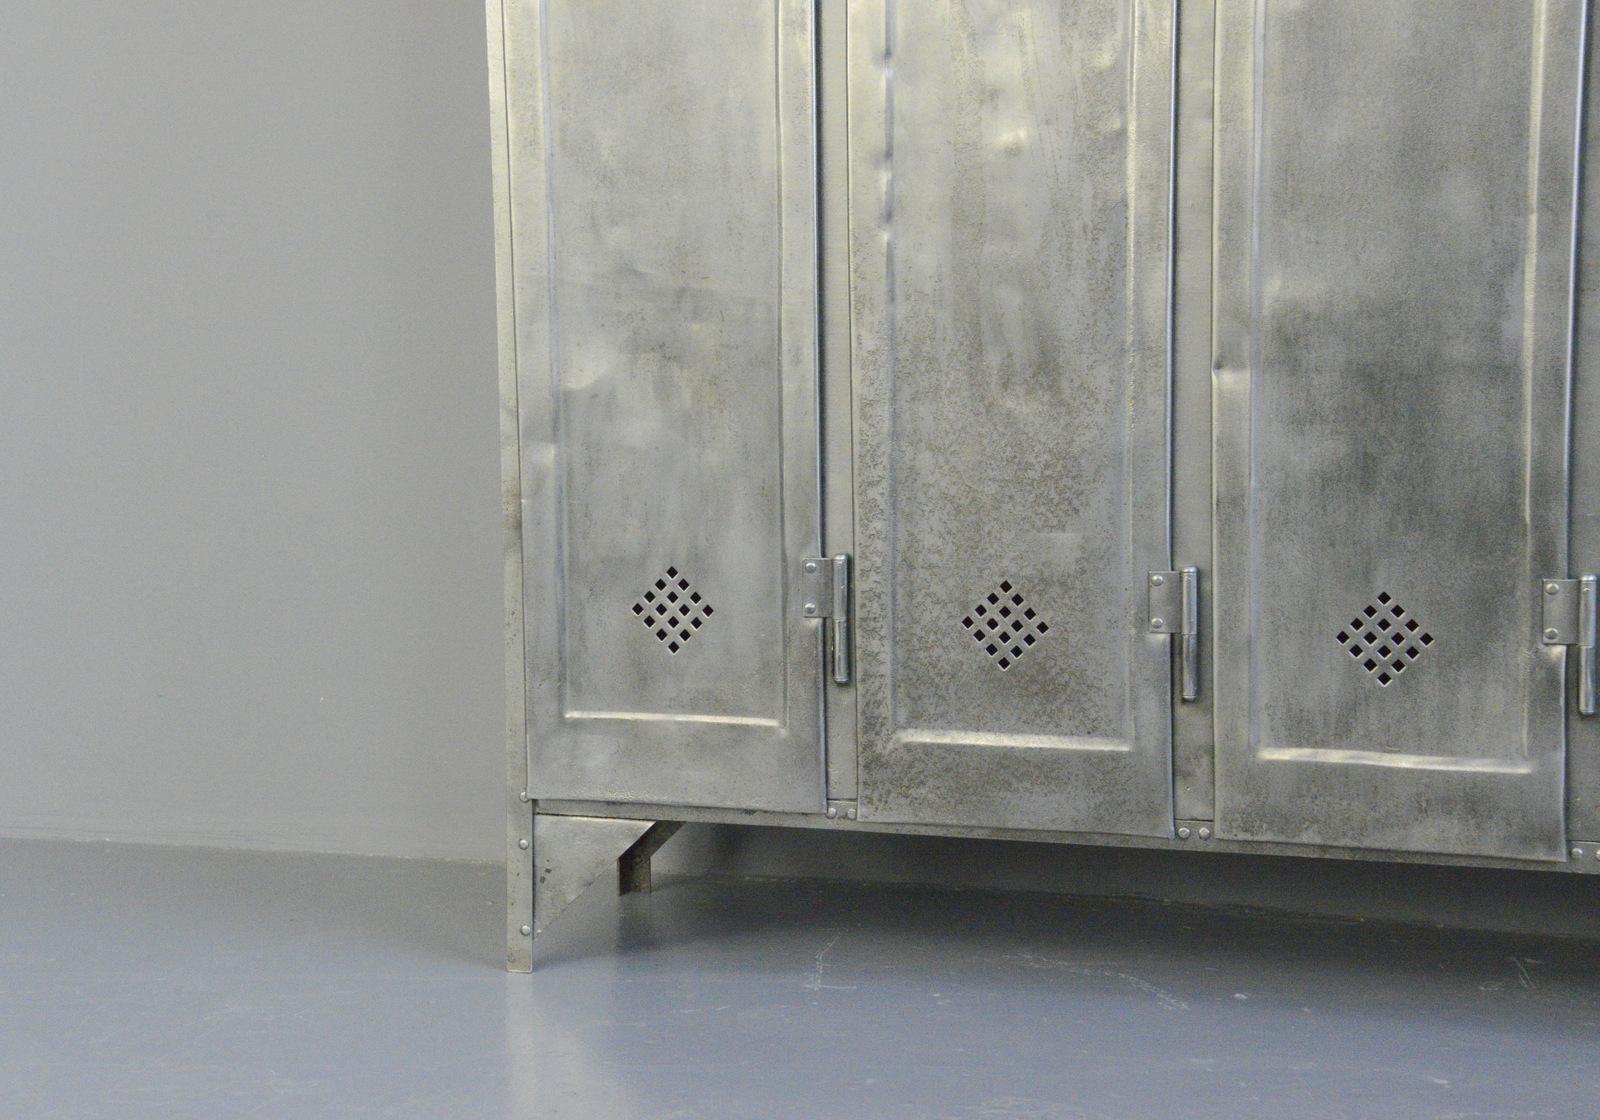 Five-door industrial lockers by Otto Kind, circa 1920s

- Made from sheet steel
- Diamond shaped vents
- 4 hanging hooks and 1 shelf in each compartment
- Made by Otto Kind
- German, 1920s
- Measures: 151cm wide x 33cm deep x 175cm